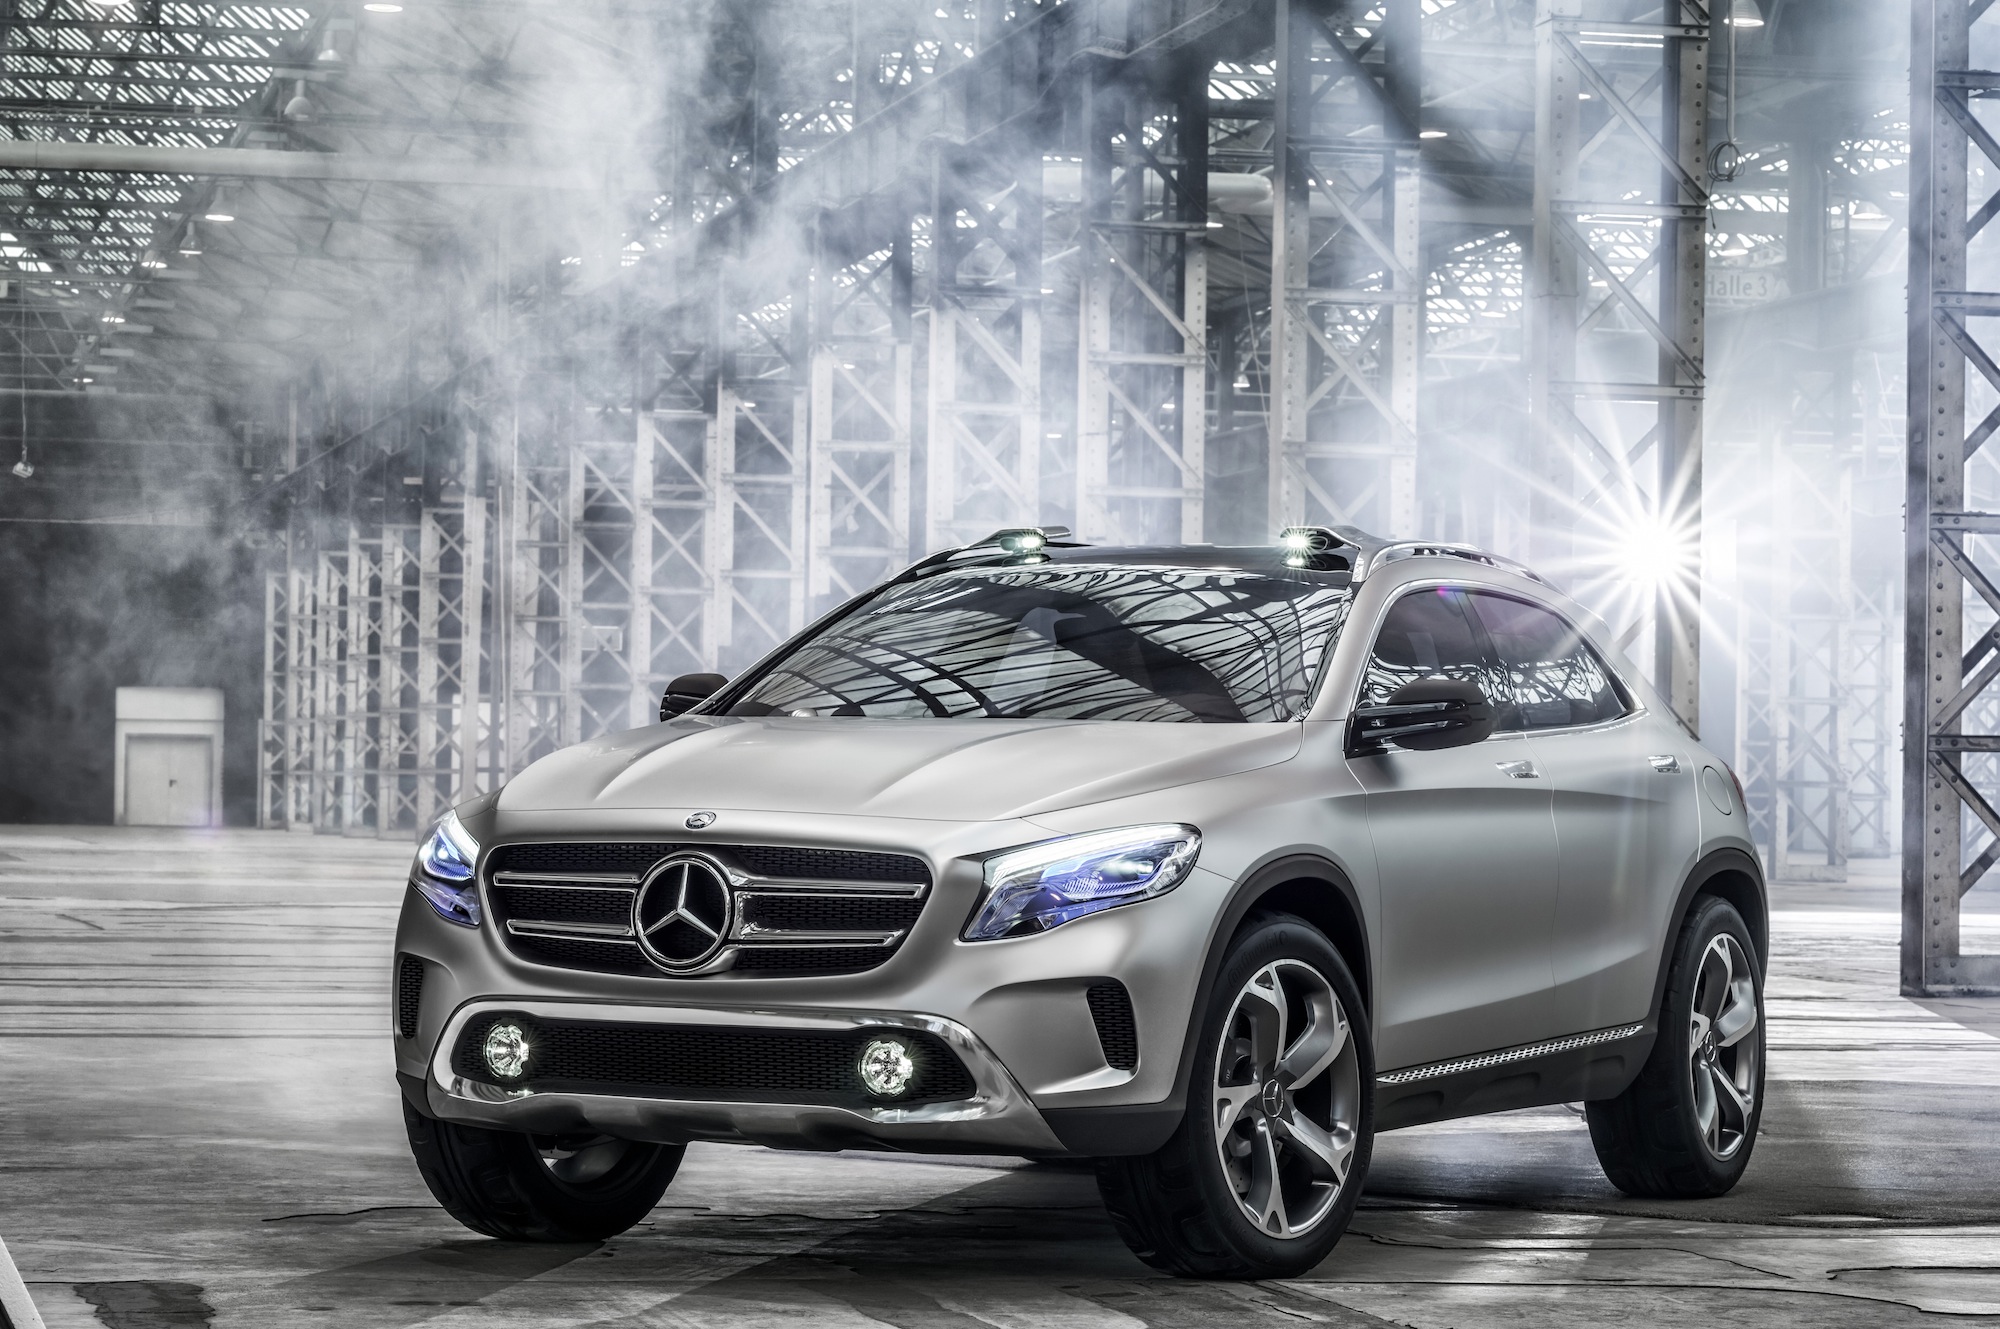 GLA Concept by Mercedes-Benz